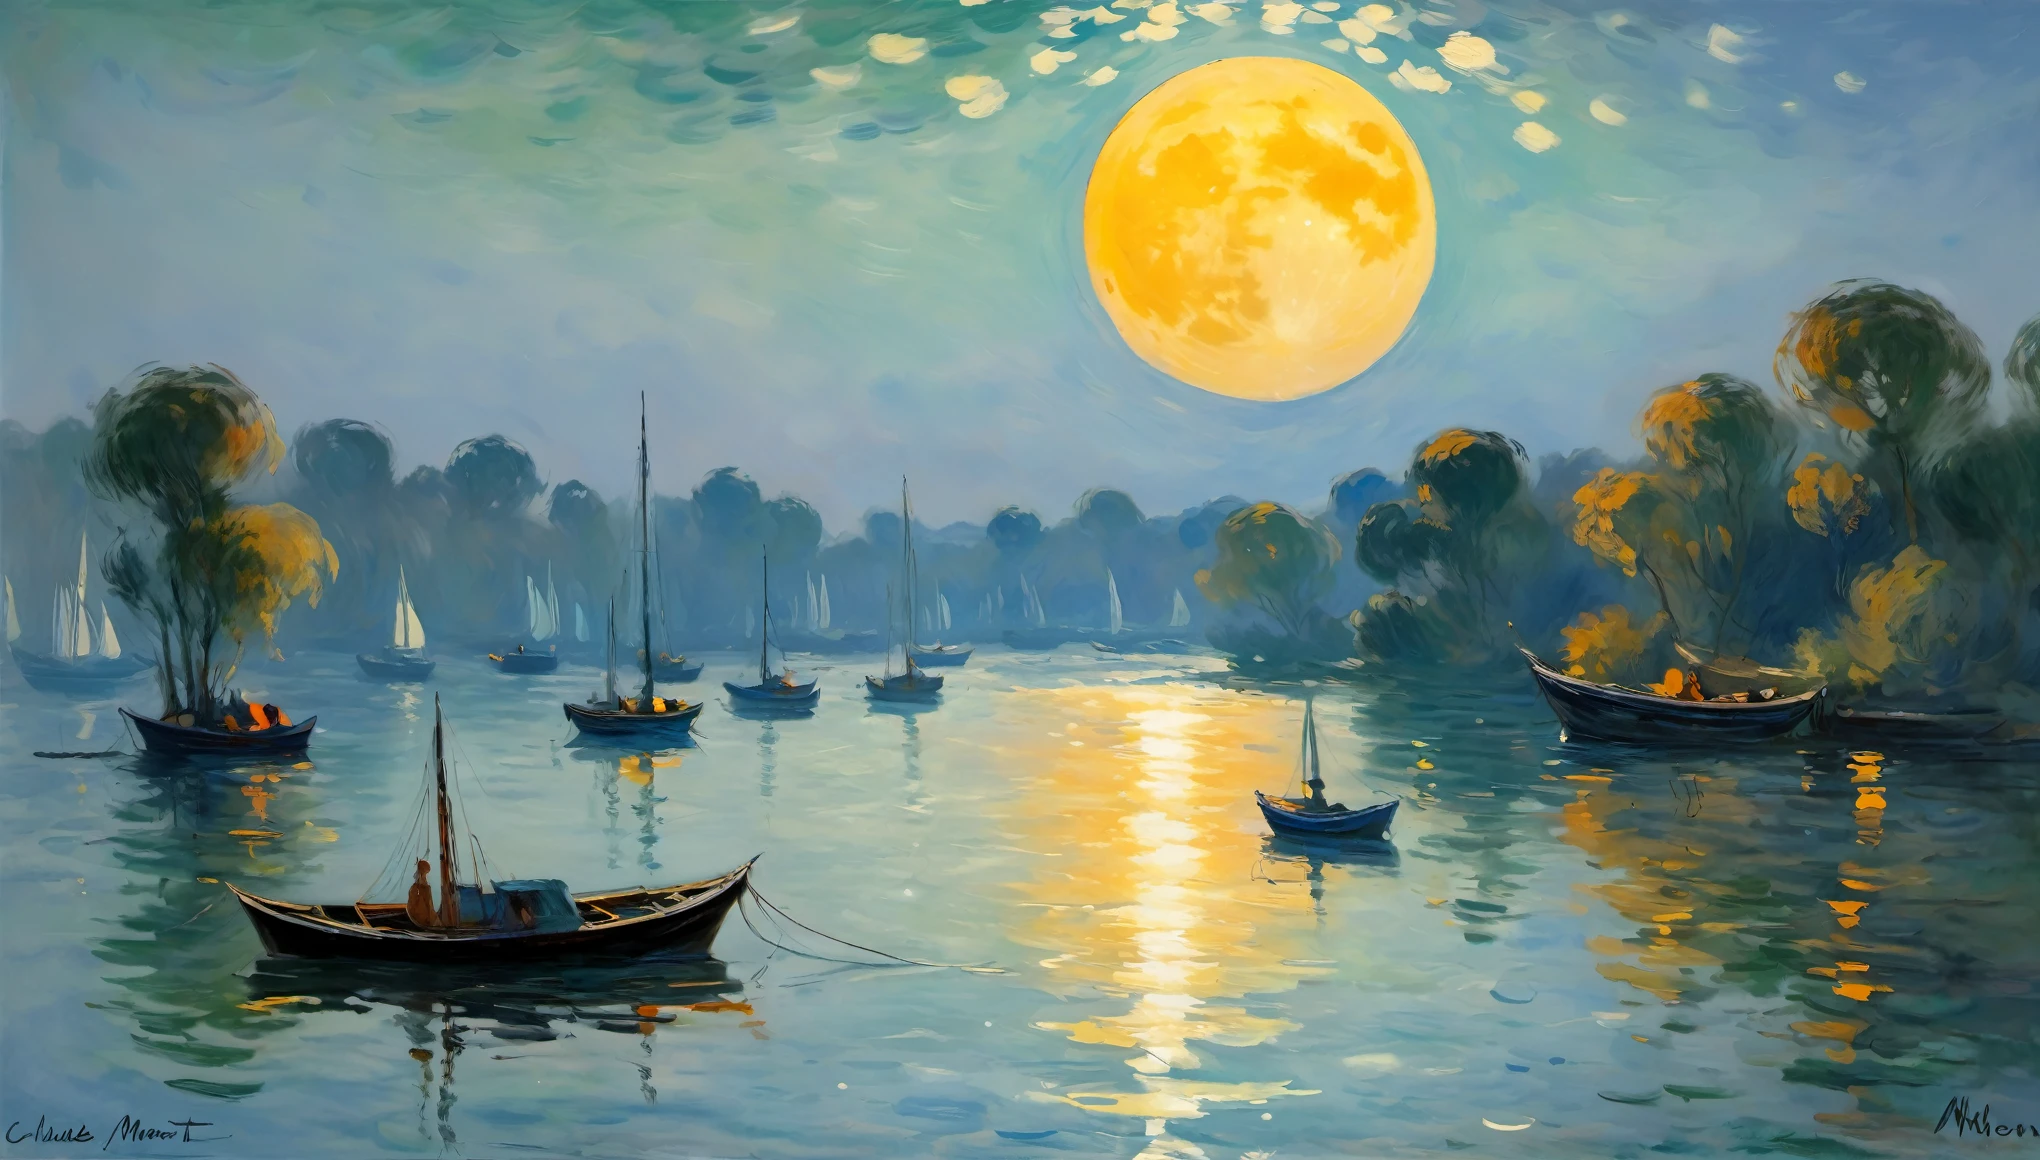 This impressionist painting captures the enchanting beauty of nature. With its dominant blue and orange hues, it exudes a romantic and passionate atmosphere. A giant yellow moon dominates the center, surrounded by hazy boats and ripples. The sky fades from green to blue, while the water reflects the moon's glow, drawing the eye to the distance. Signed by Claude Monet, it showcases his unique style and masterful technique, a treasure worth admiring.